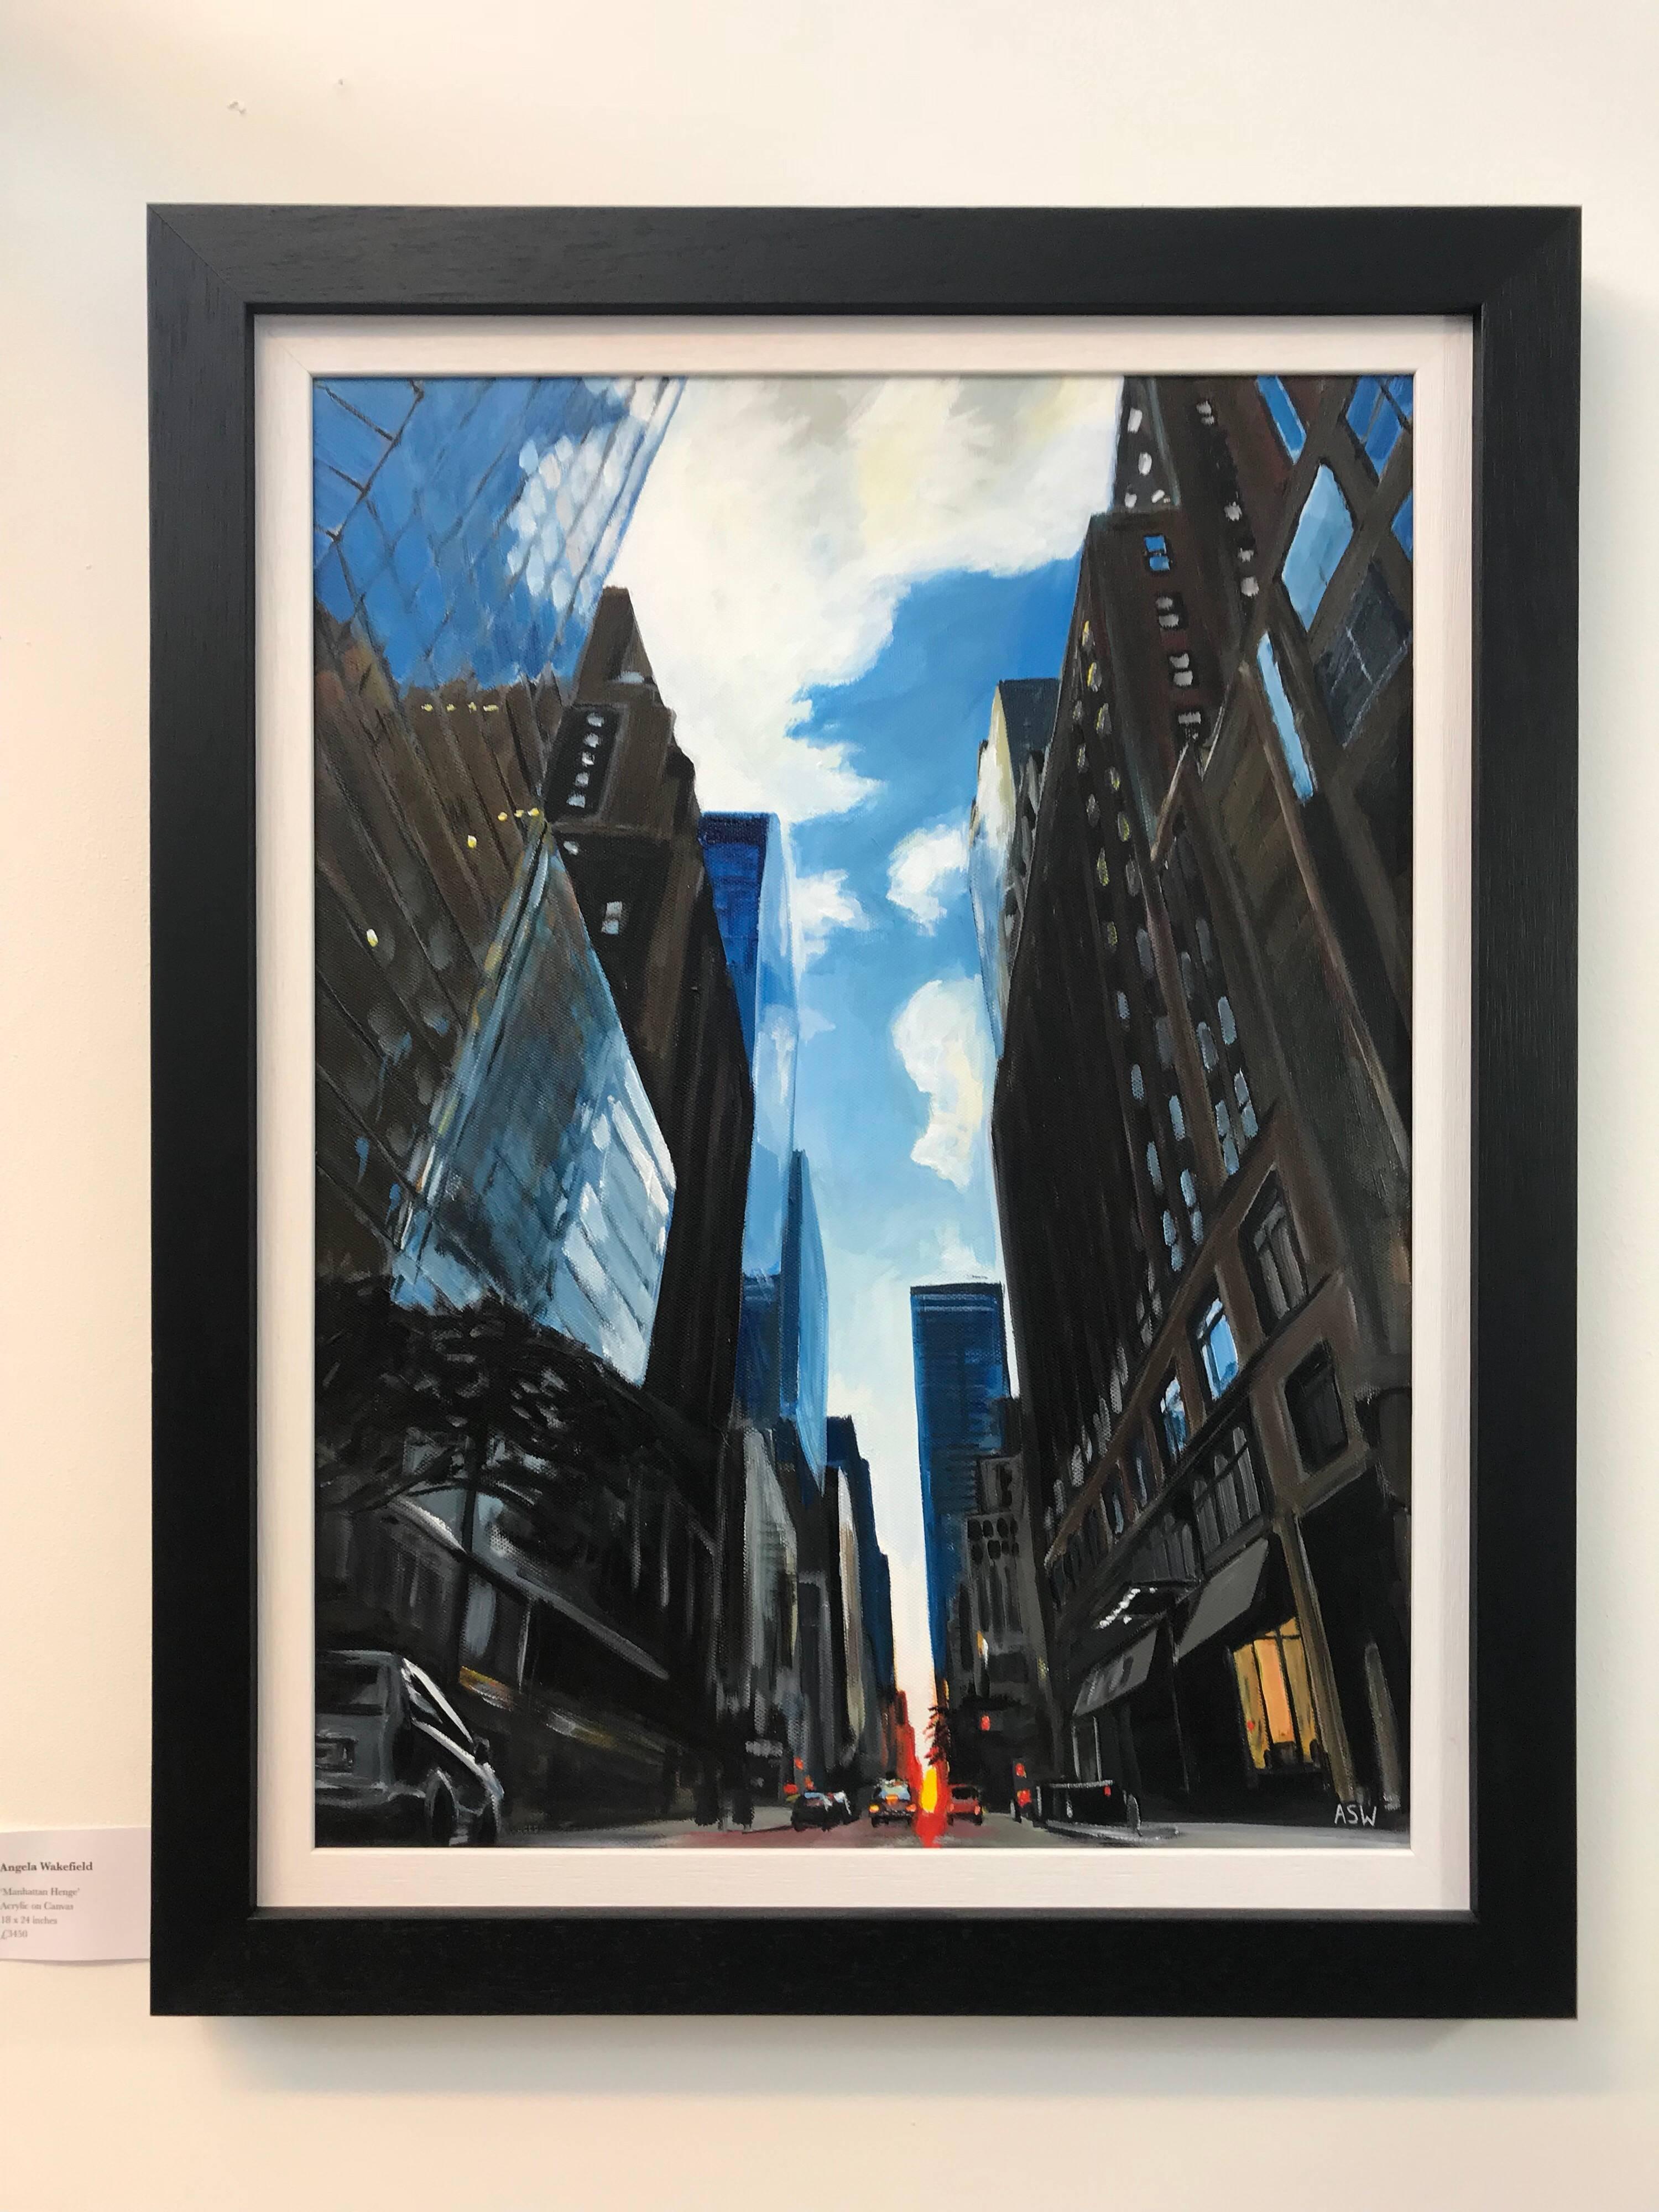 Painting of Summer Sunset in New York City by Leading British Urban Artist UK 3